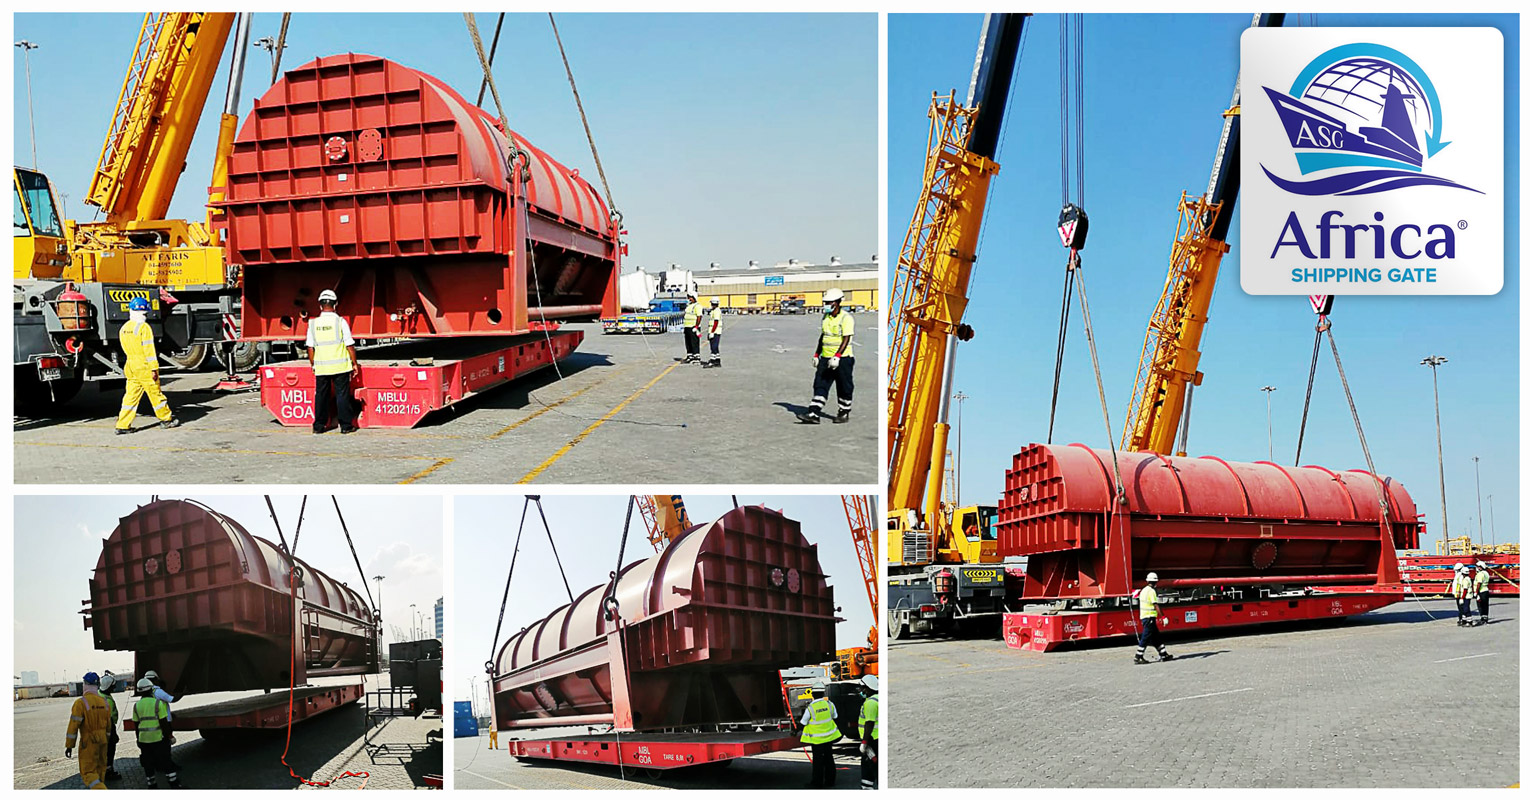 Africa Shipping Gate Transported a second 105 Ton Rotor from Jebel Ali to Alexandria